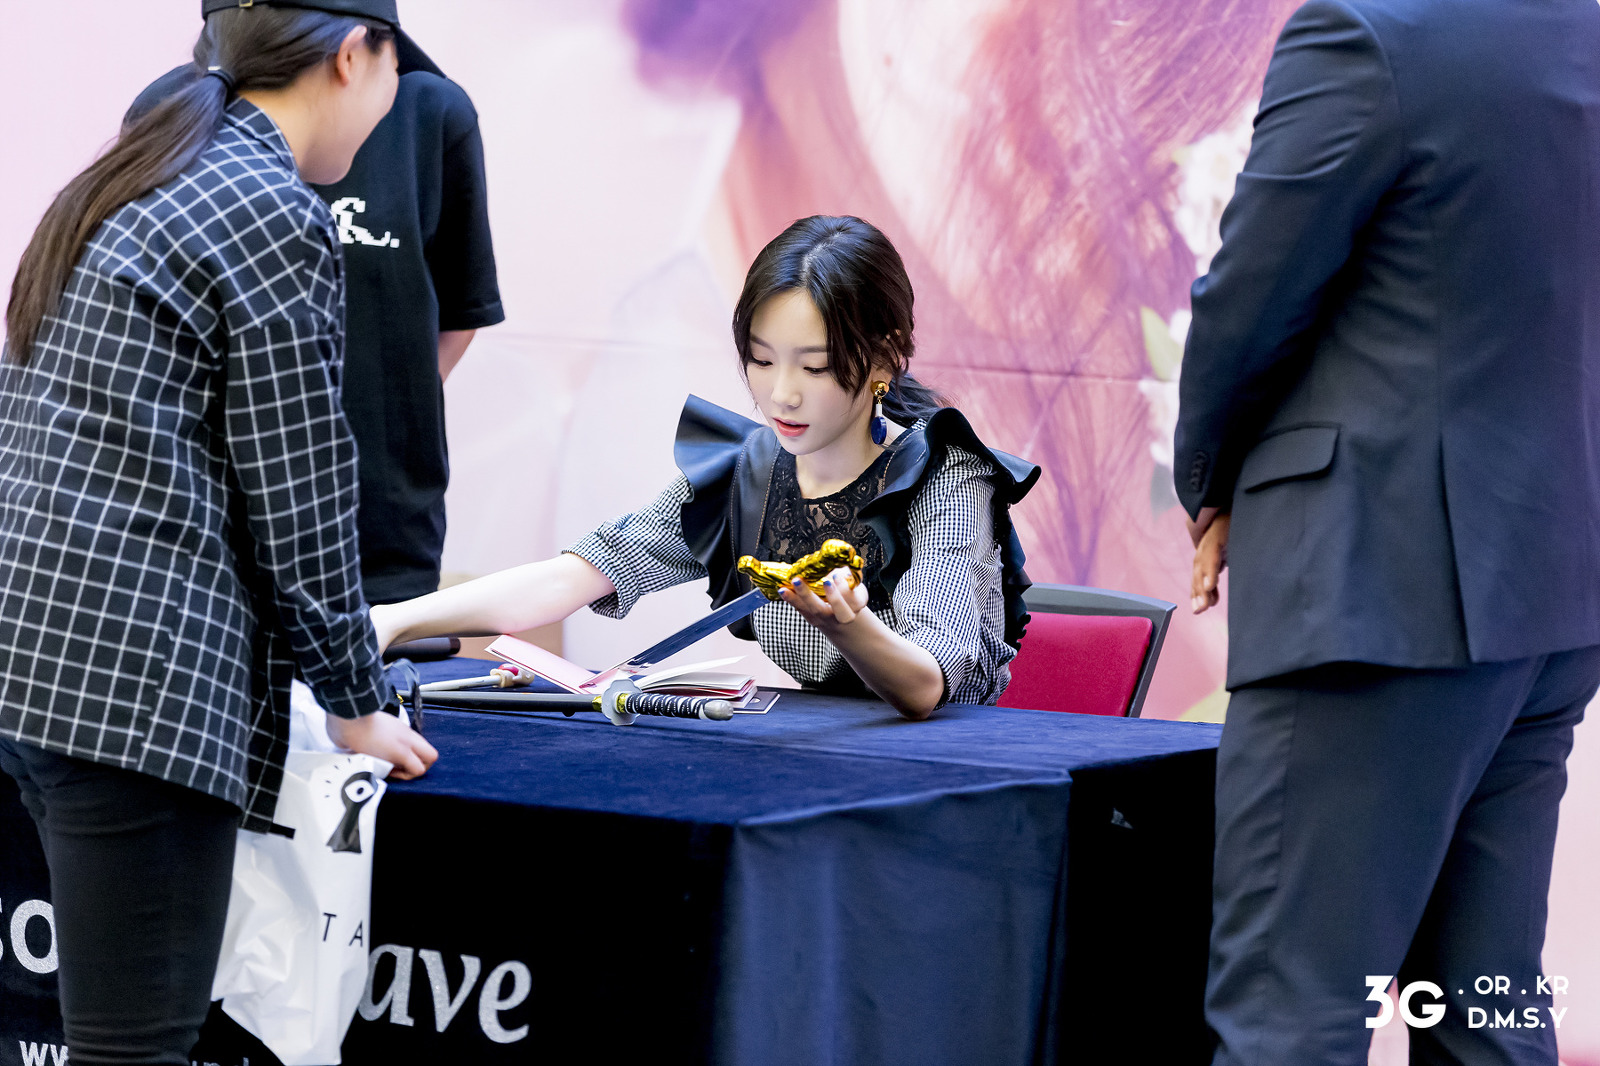 [PIC][16-04-2017]TaeYeon tham dự buổi Fansign cho “MY VOICE DELUXE EDITION” tại AK PLAZA vào chiều nay  - Page 5 2769954358FDD8D5299554